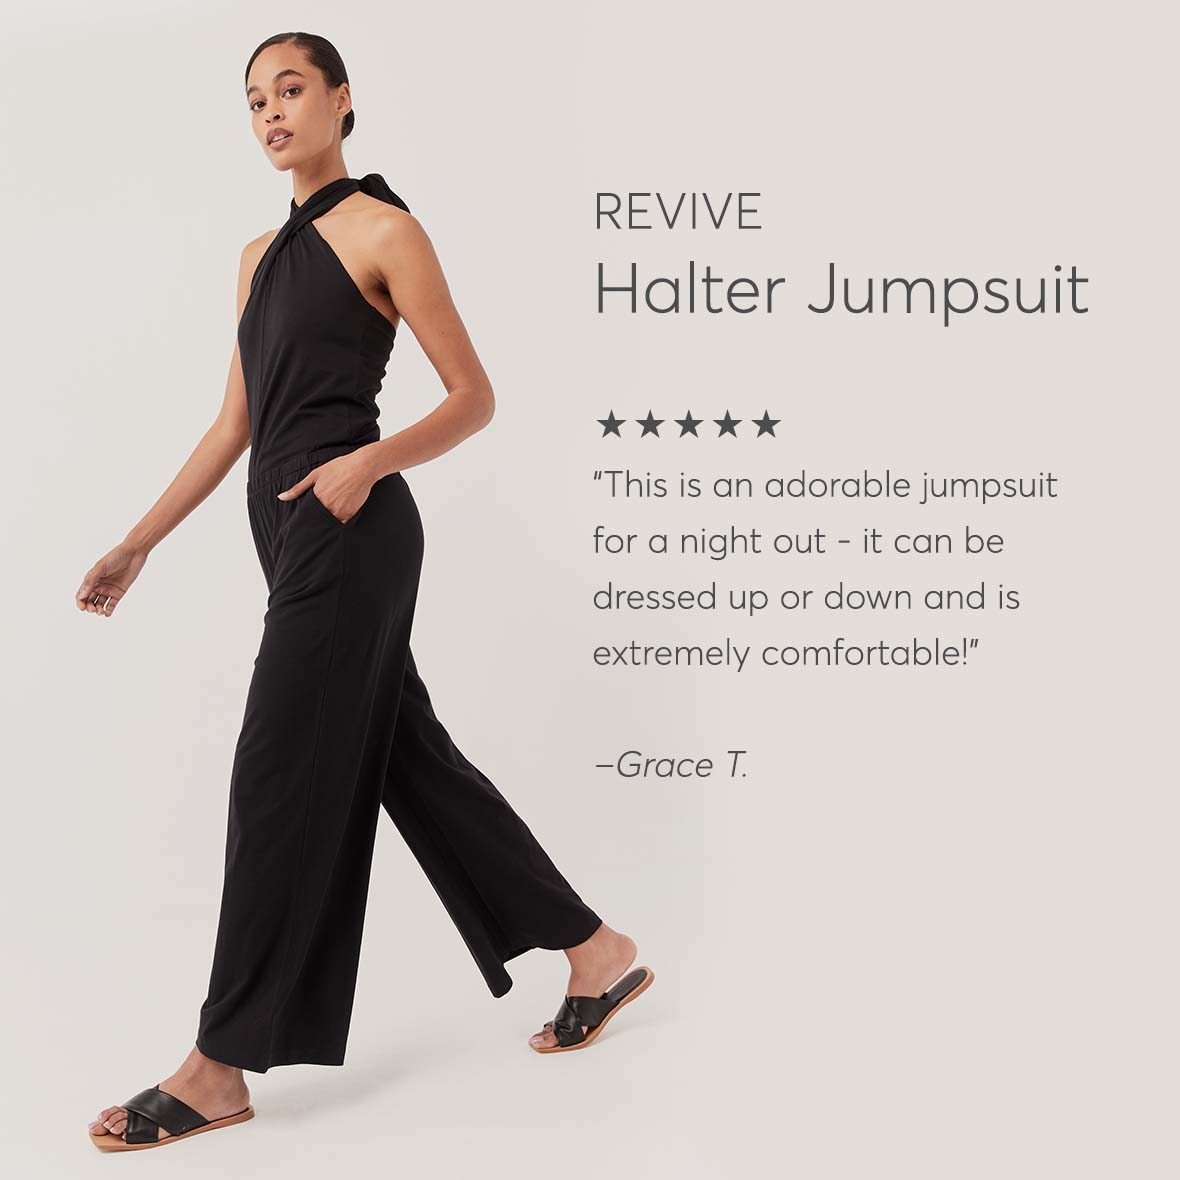 Revive Halter Jumpsuit: This is an adorable jumpsuit for a night out - it can be dressed up or down and is extremely comfortable!